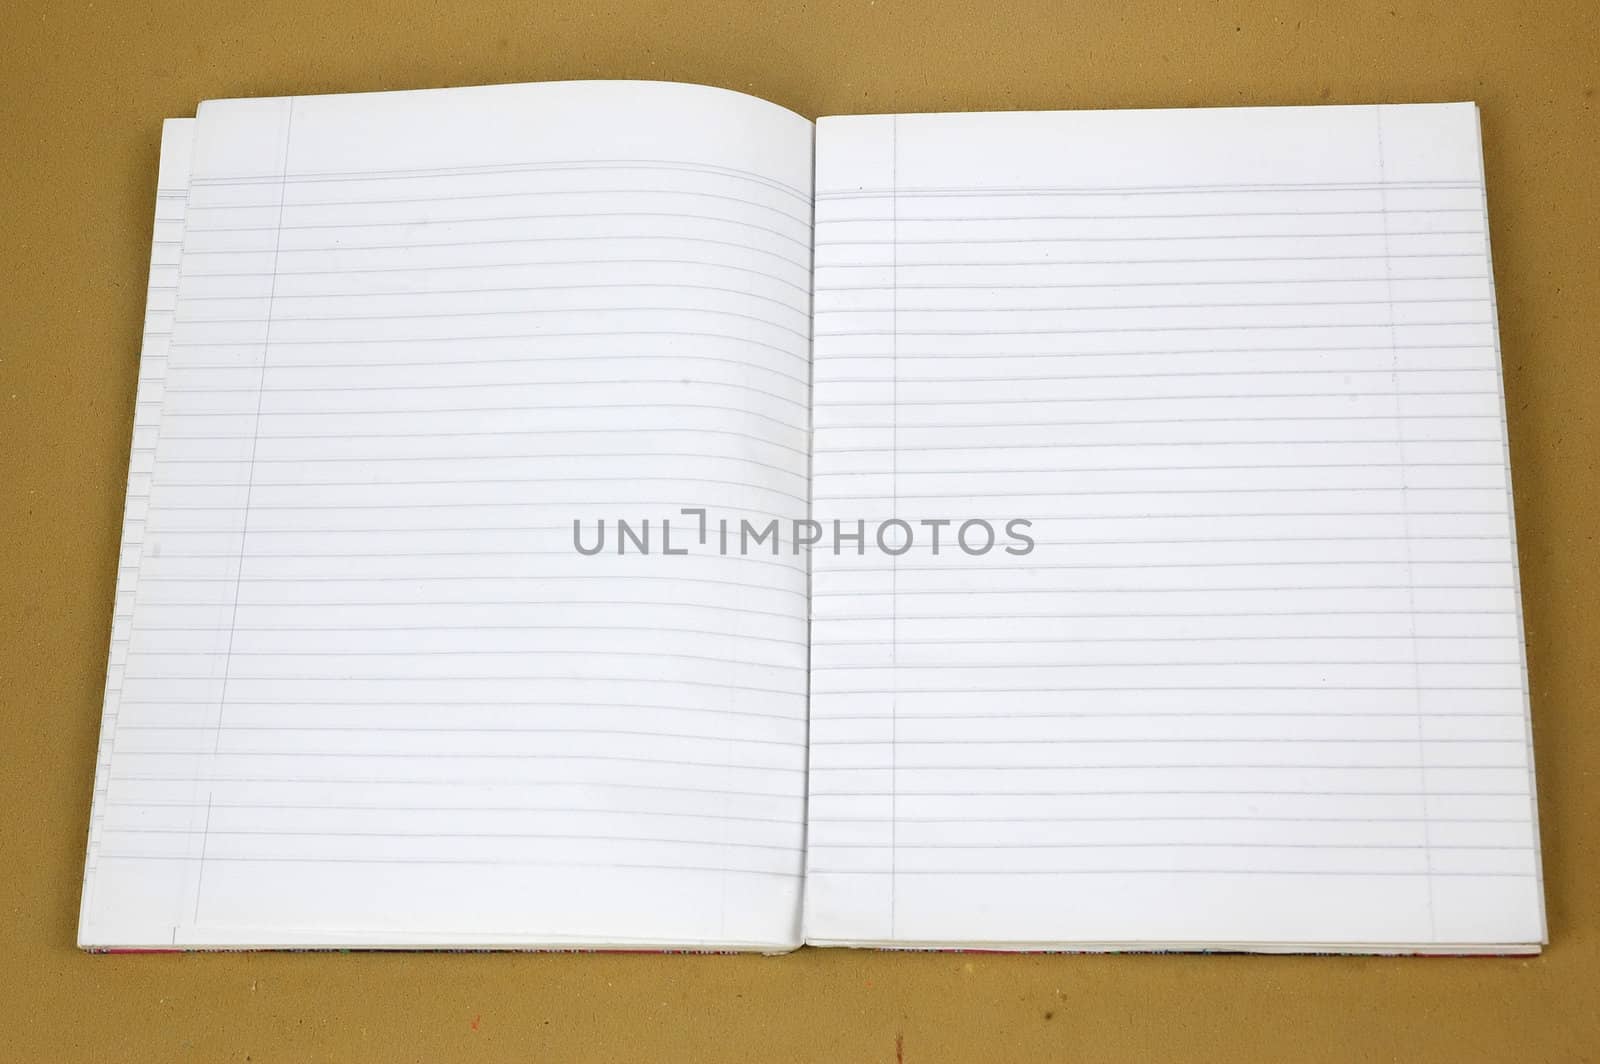 a blank book striped open with brown background